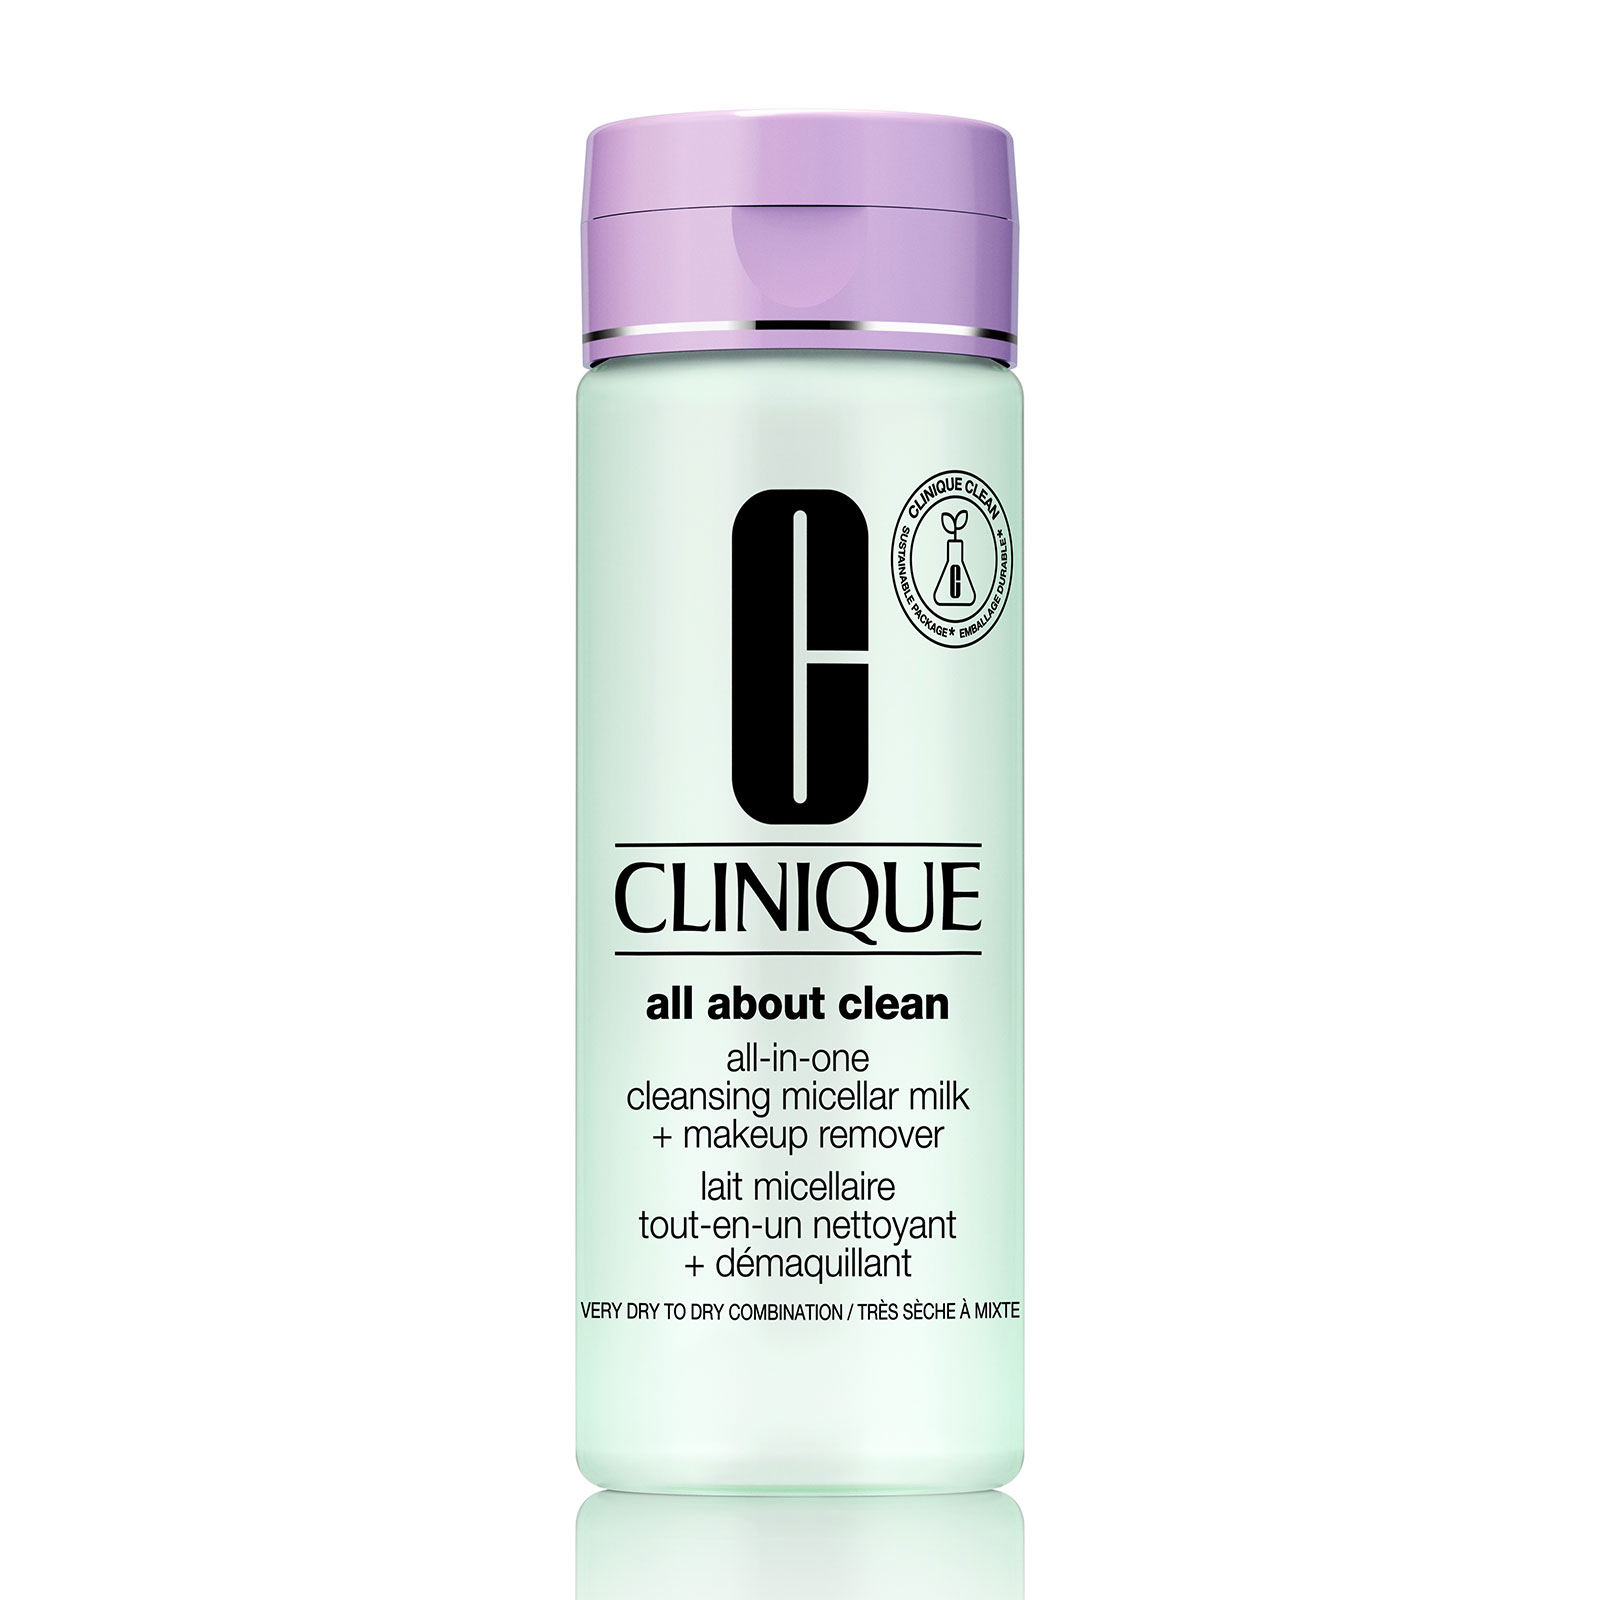 Clinique All In One Cleansing Micellar Milk 200Ml - Skin Type 1 & 2